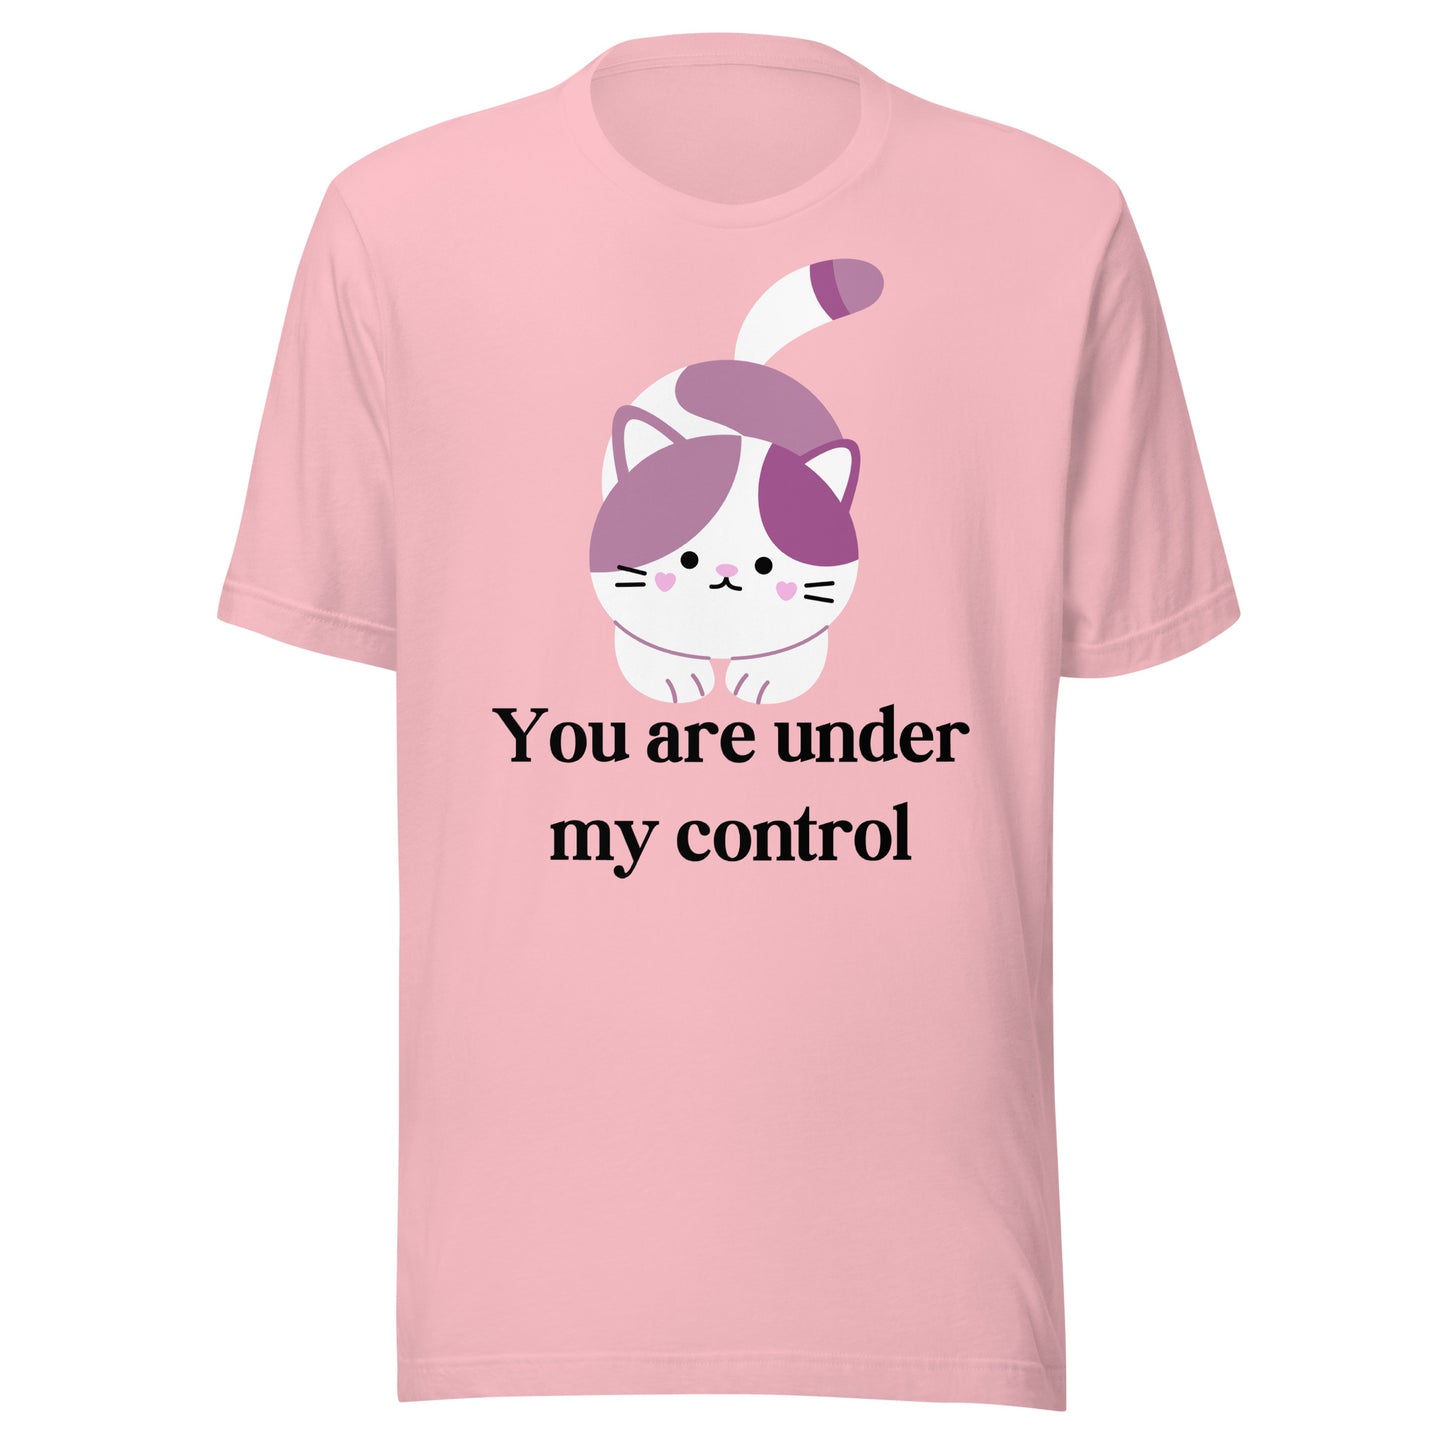 "You're under my control" - Unisex t-shirt